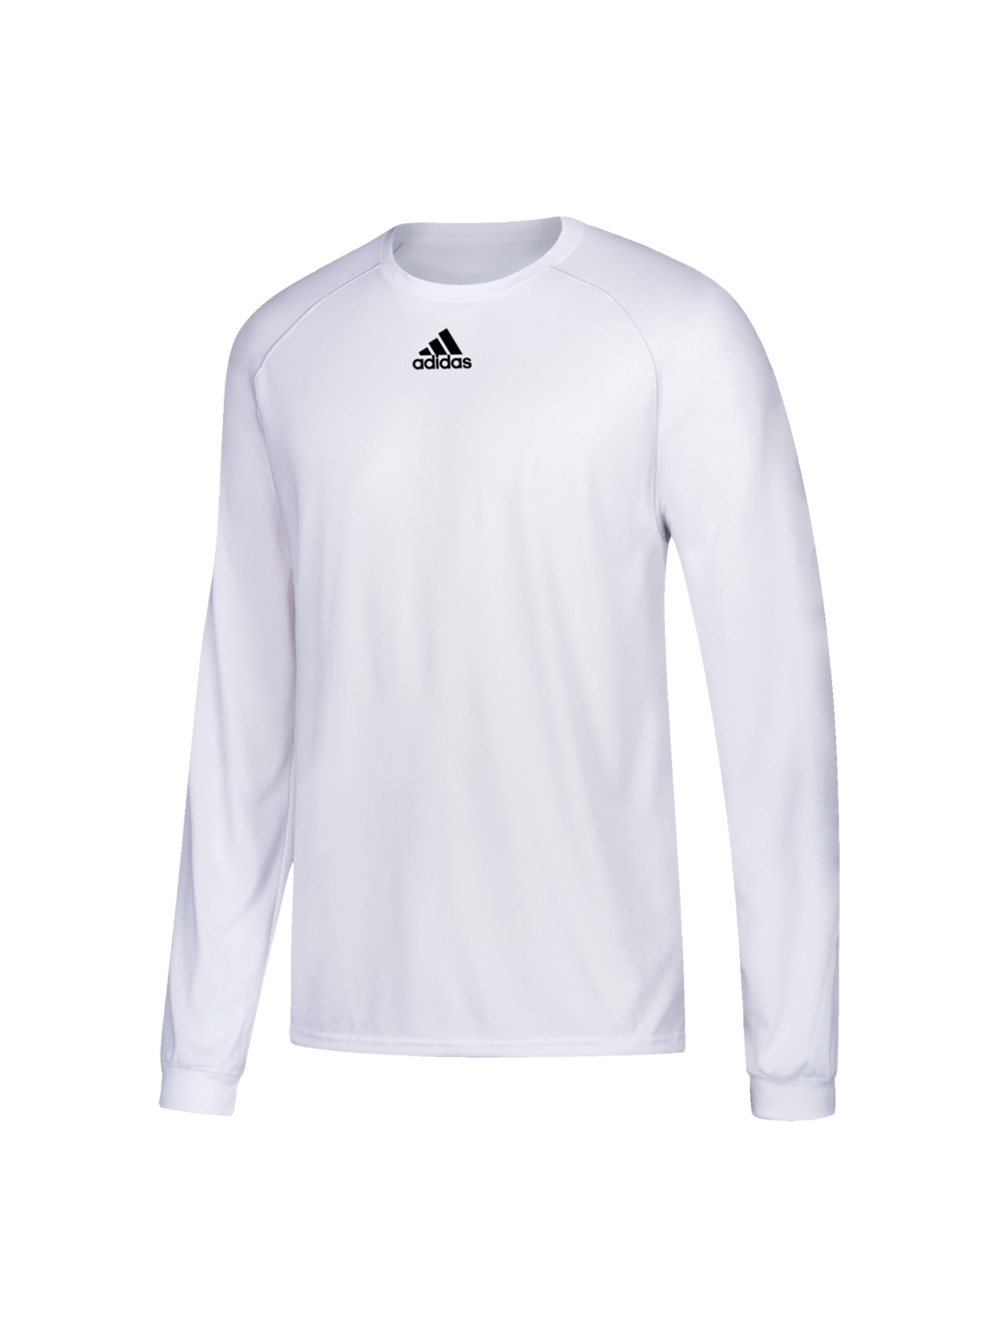 Adidas Youth Long Sleeve Tee | Midwest Volleyball Warehouse